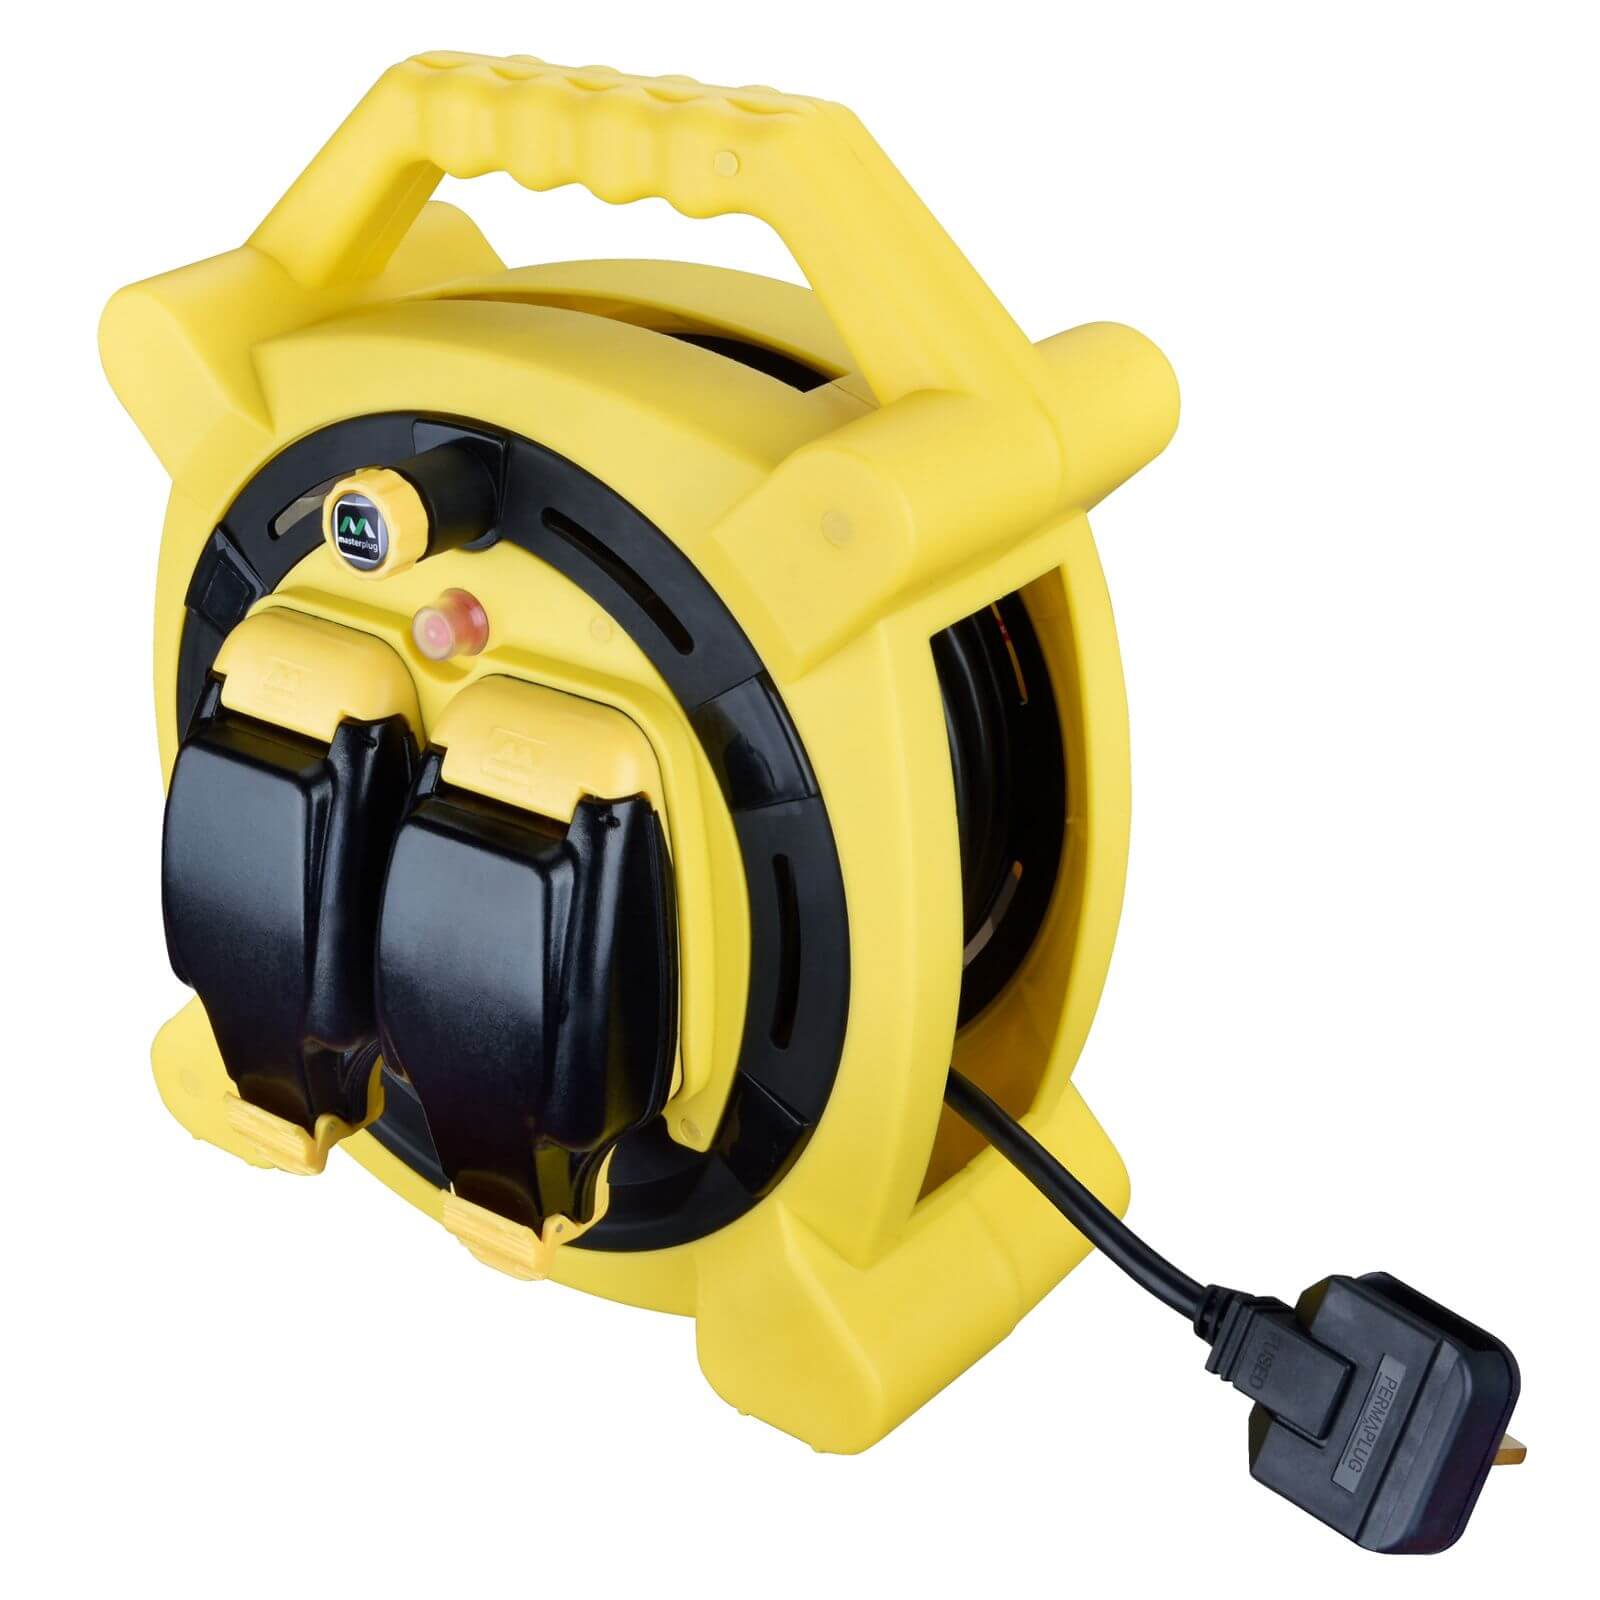 Masterplug 2 Socket Cable Reel with IP Rated Sockets 15m Black/Yellow